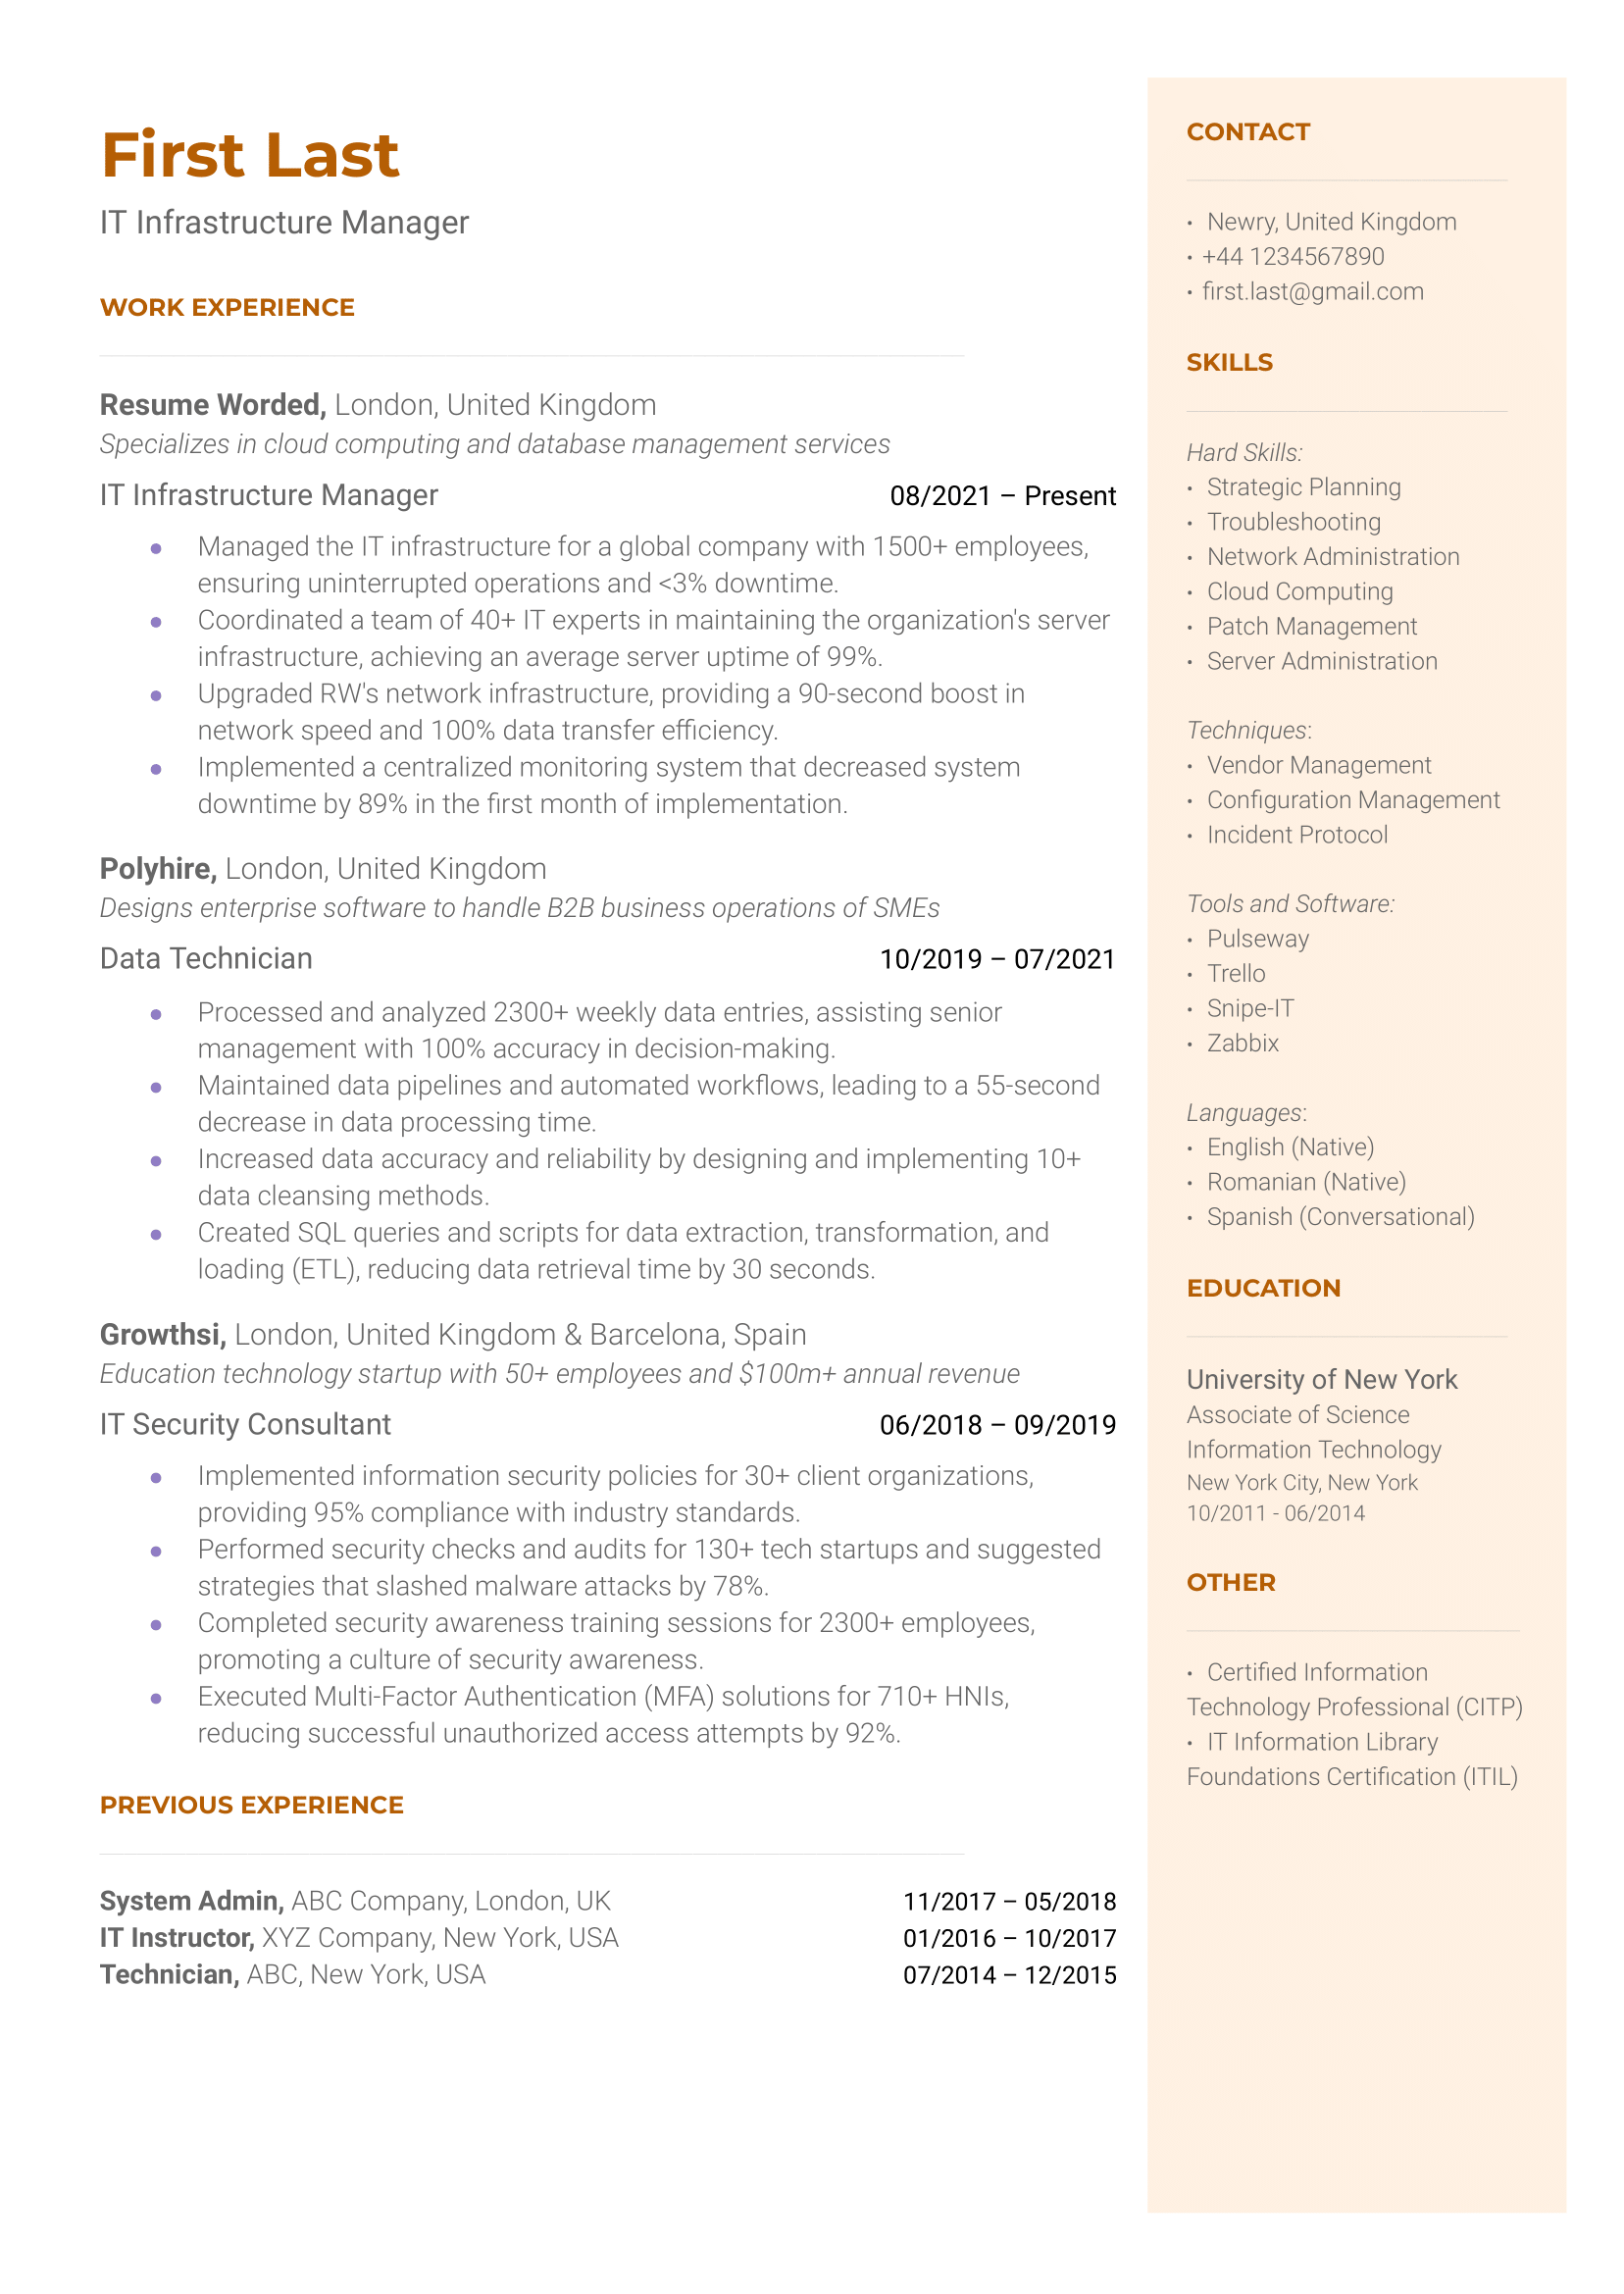 A professional CV for an IT Infrastructure Manager role showcasing technical and leadership skills.